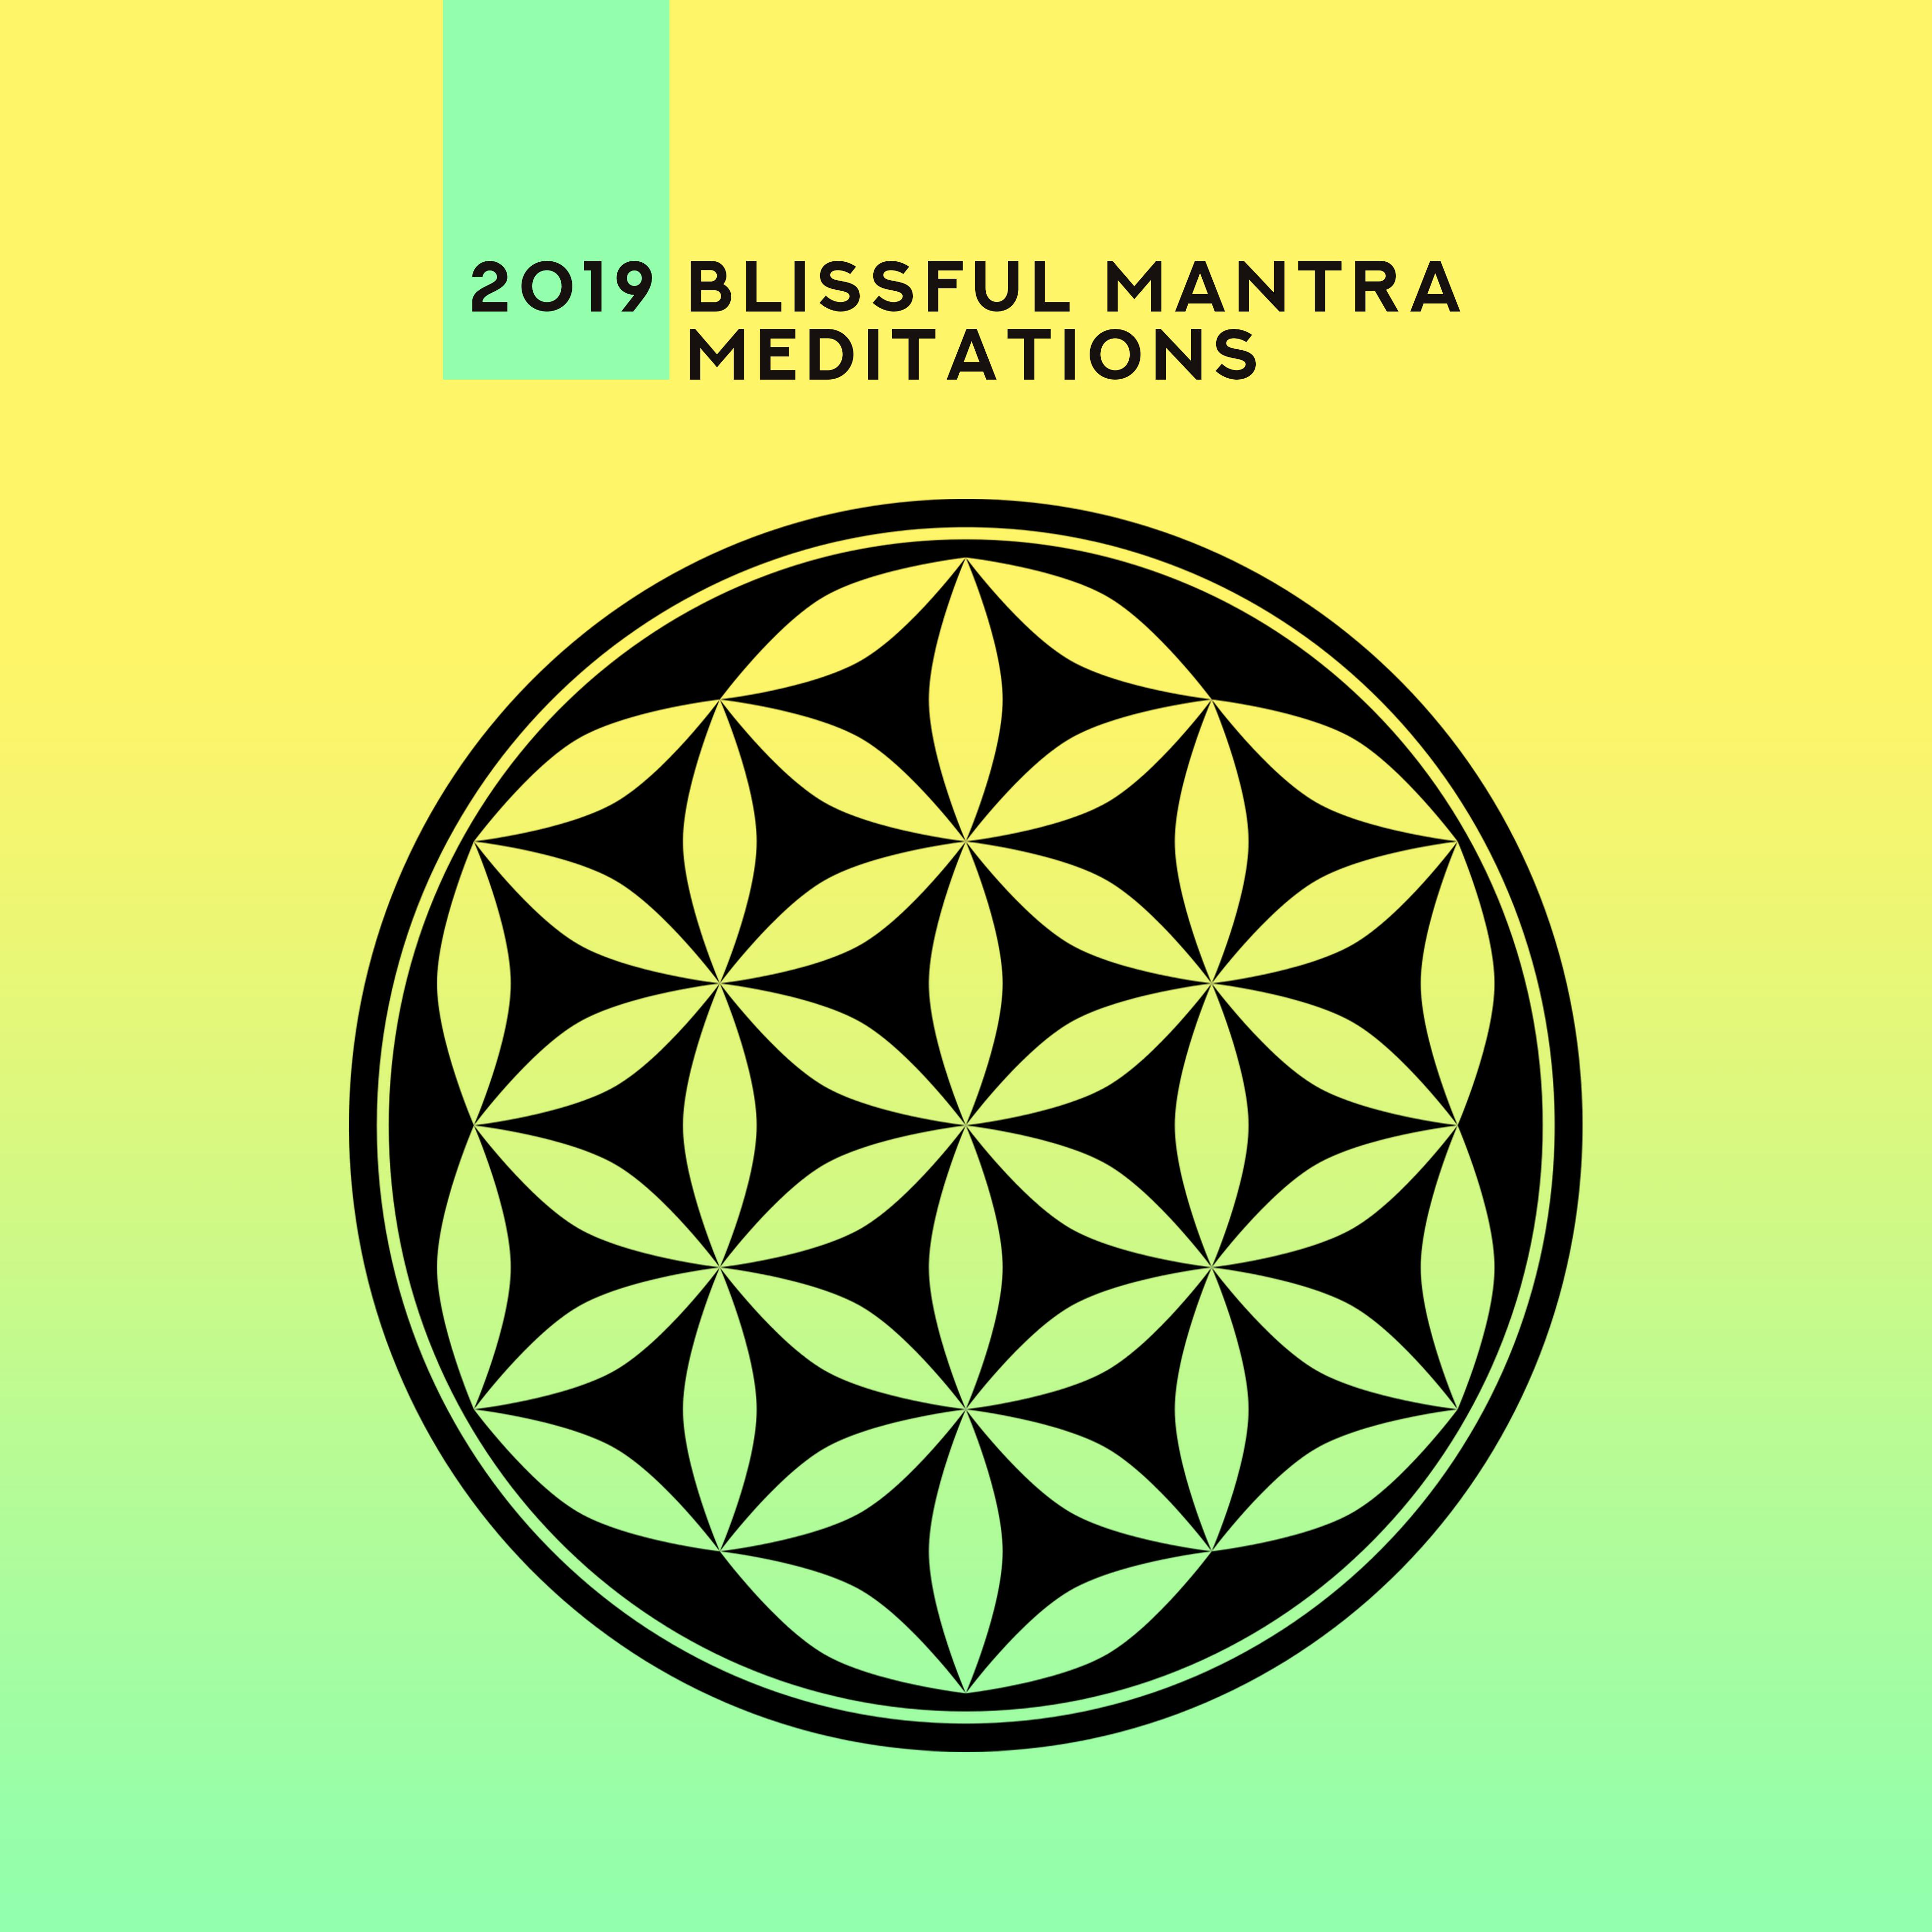 2019 Blissful Mantra Meditations: Compilation of Cosmic Ambient New Age Music for Deepest Meditation & Relaxation Moments, Chakra Healing, Vital Energy Increase, Zen Contemplations, Mantra